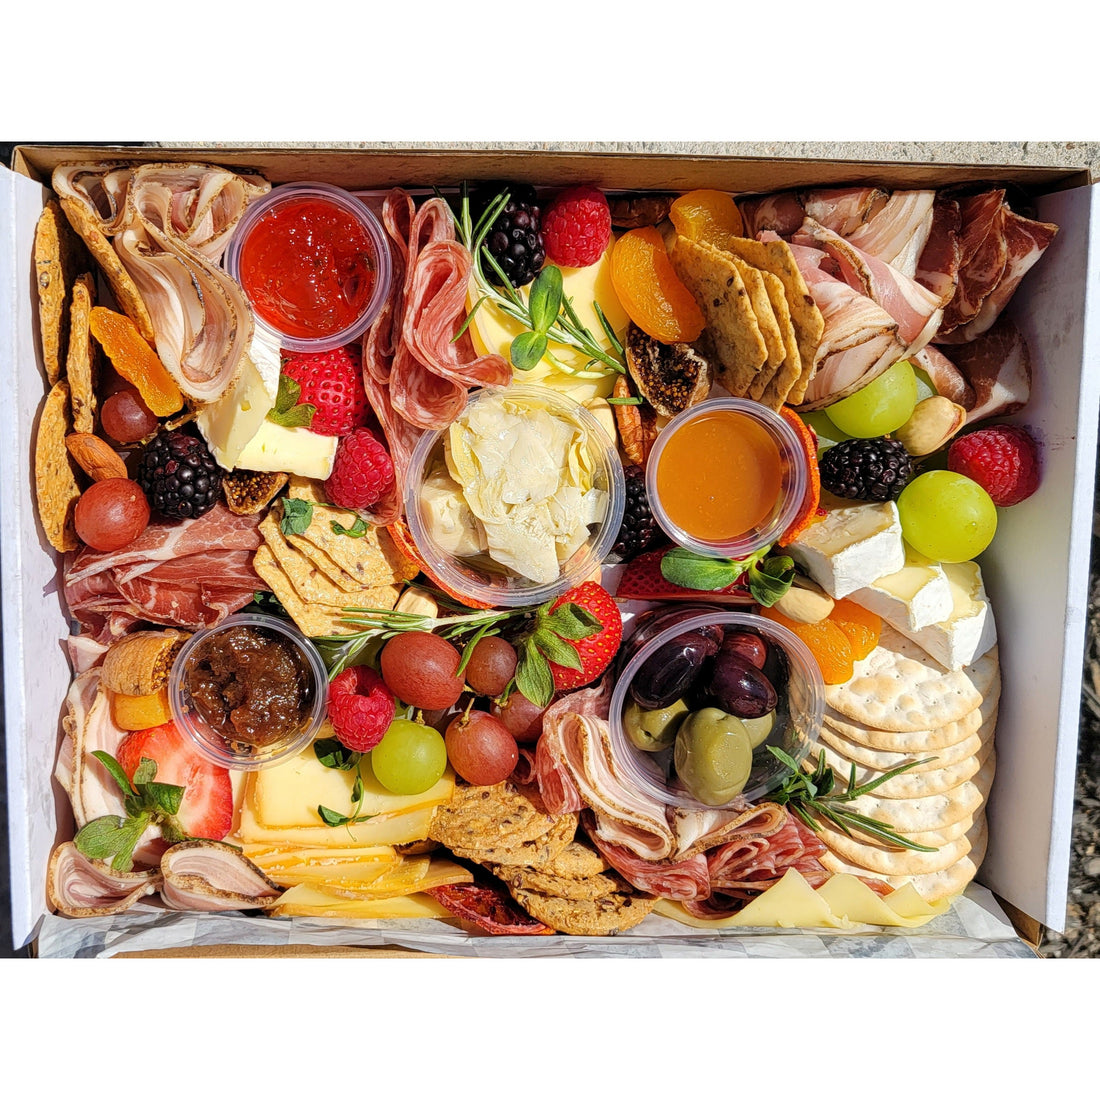 Charcuterie Box to Go! MEDIUM - pick up and same day Ottawa Area Only delivery  -extra cost for delivery, must be ordered before 2pm for same day)